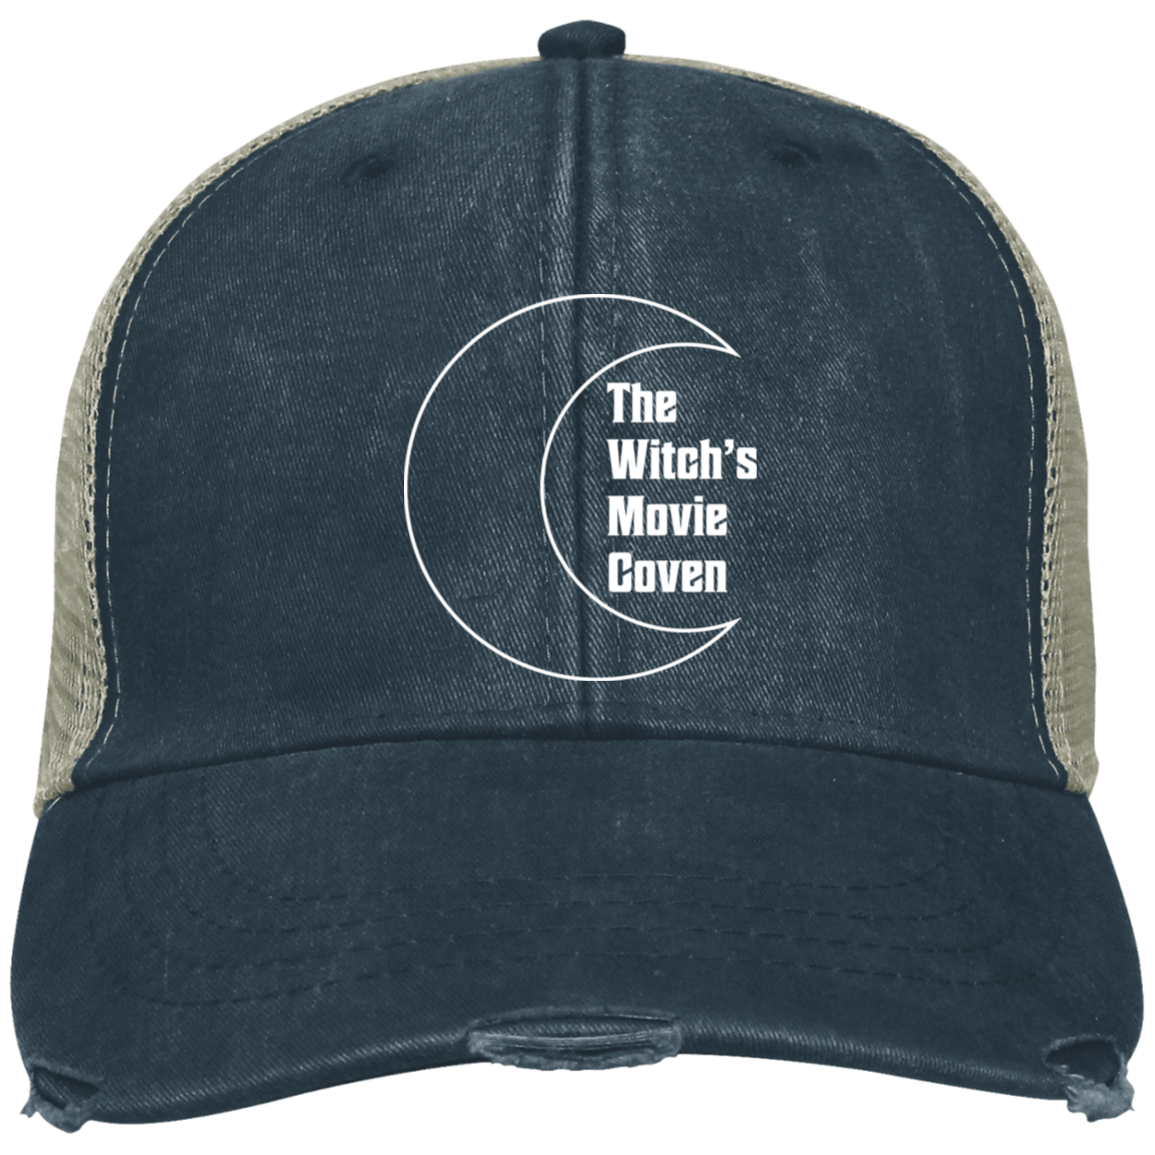 The Witch's Movie Coven Embroidered Trucker Hat